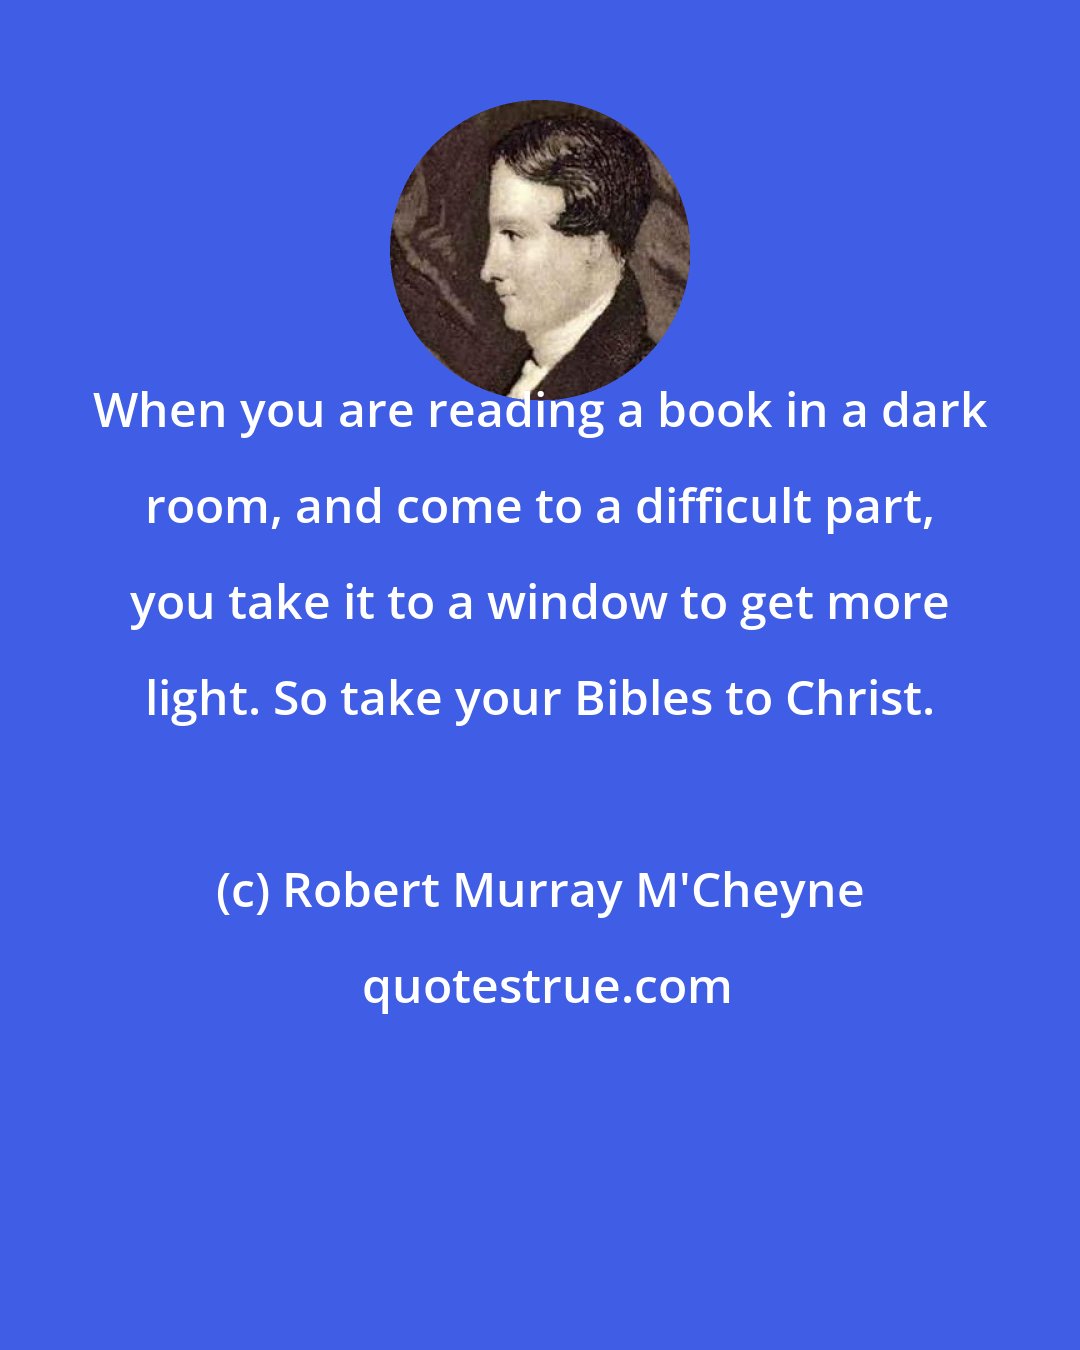 Robert Murray M'Cheyne: When you are reading a book in a dark room, and come to a difficult part, you take it to a window to get more light. So take your Bibles to Christ.